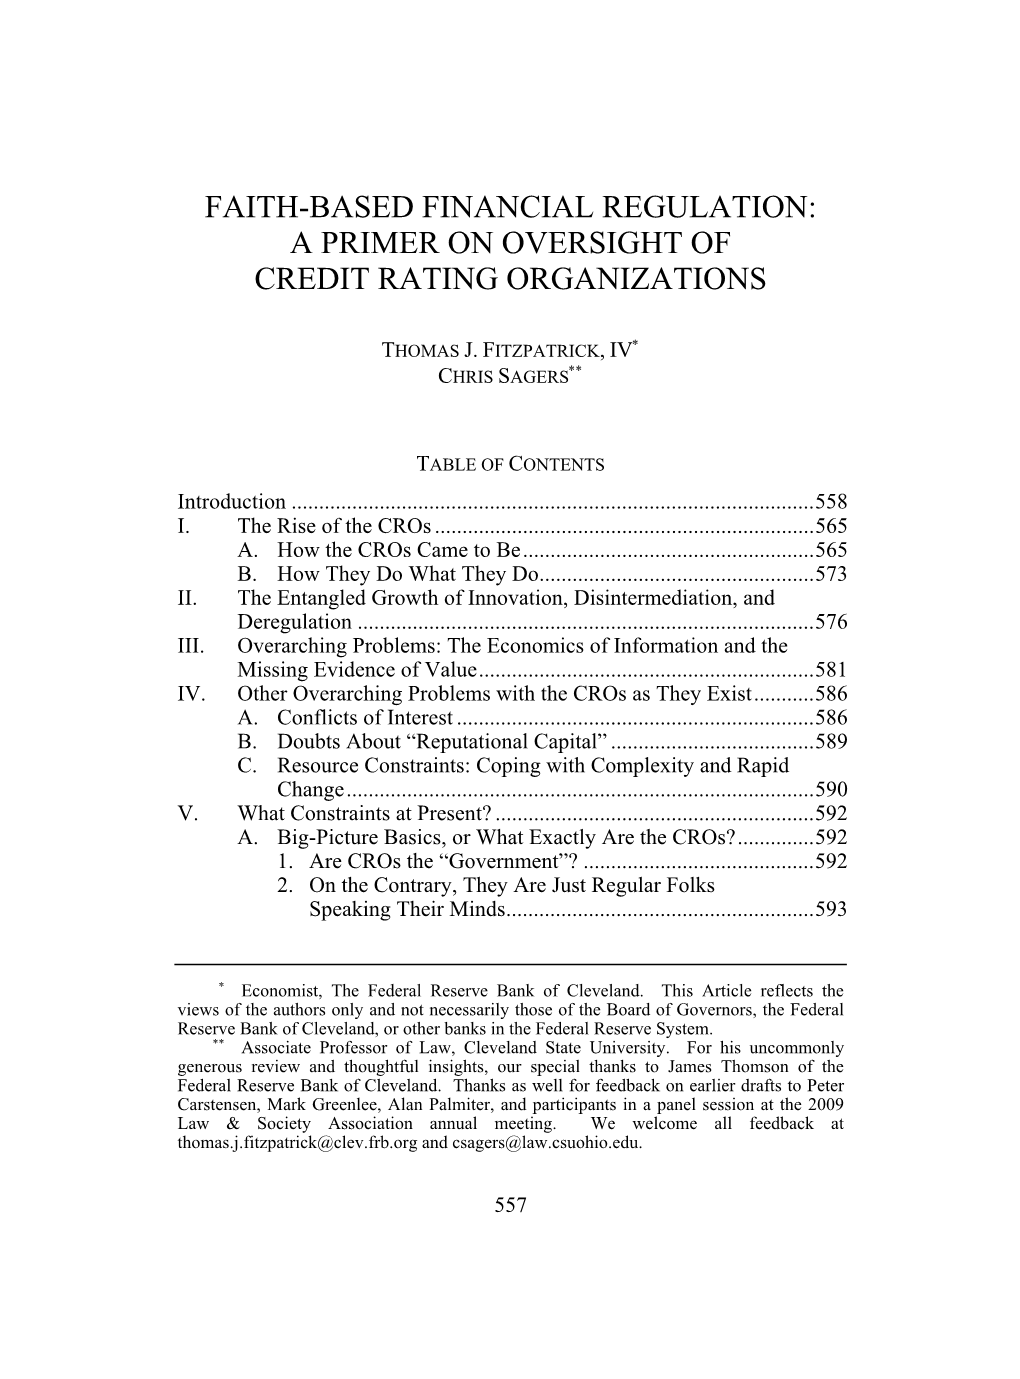 Faith-Based Financial Regulation: a Primer on Oversight of Credit Rating Organizations